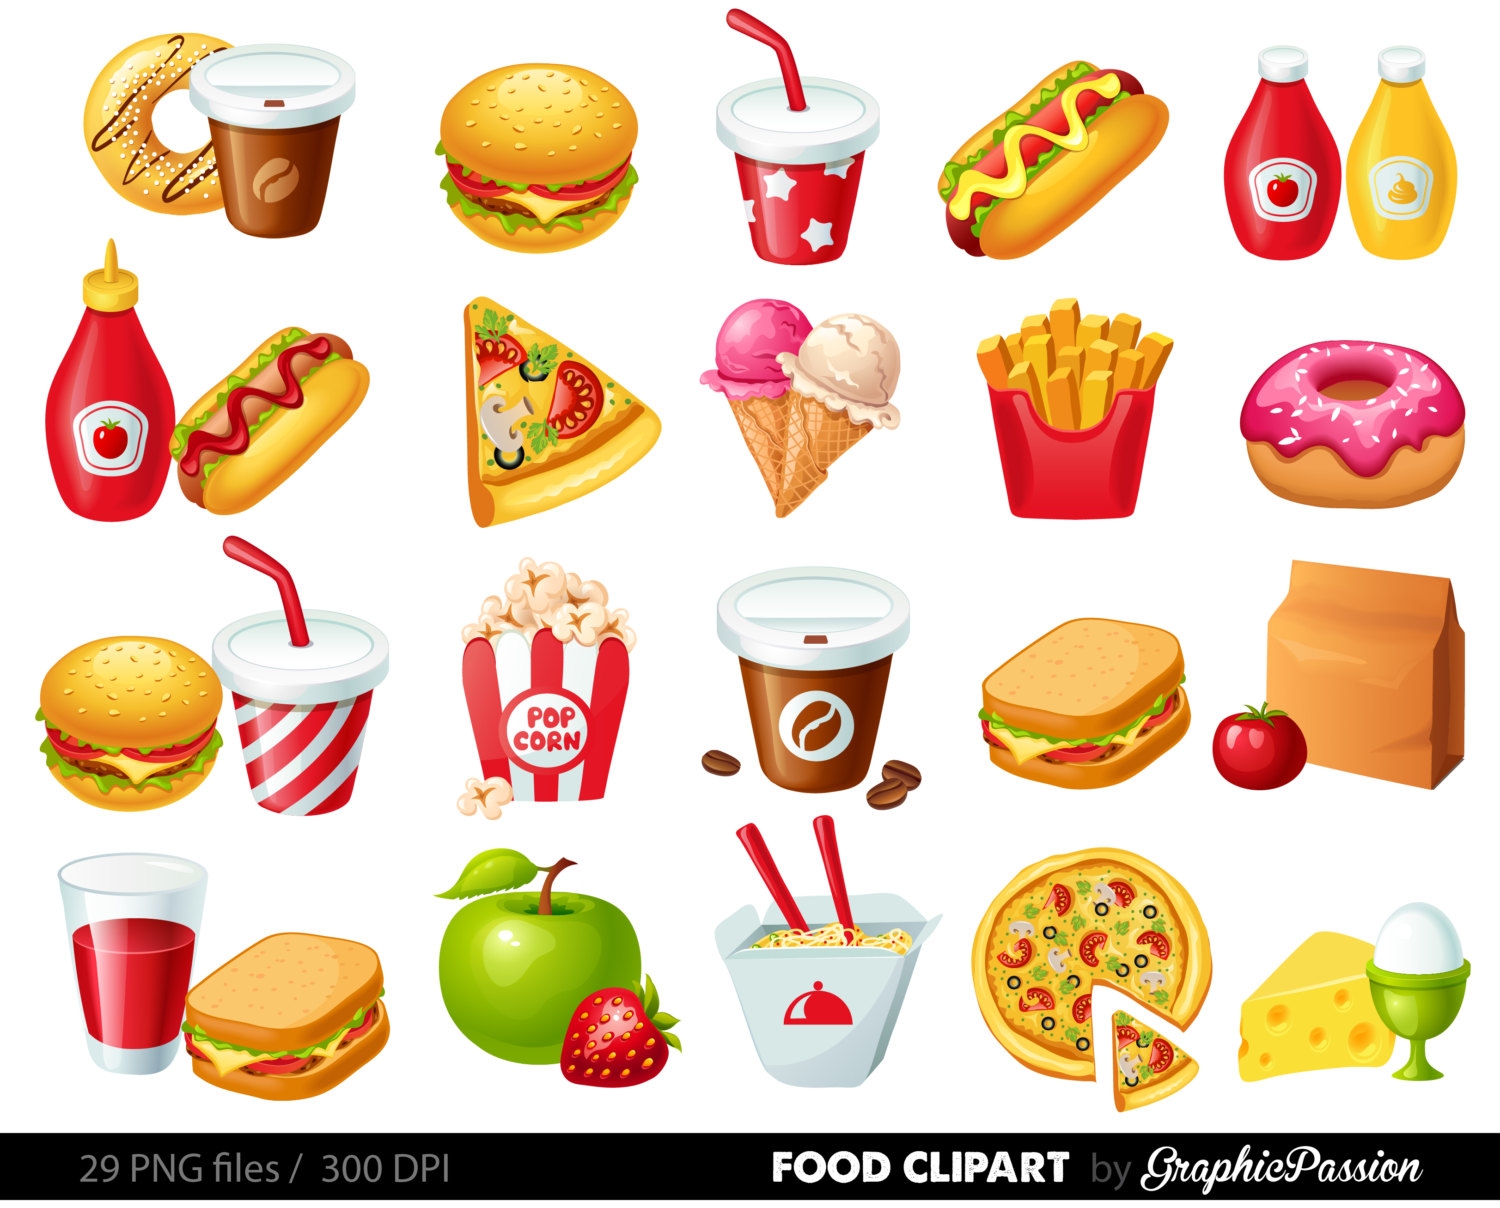 Food images clipart - Clipart - Clip Art Of Food